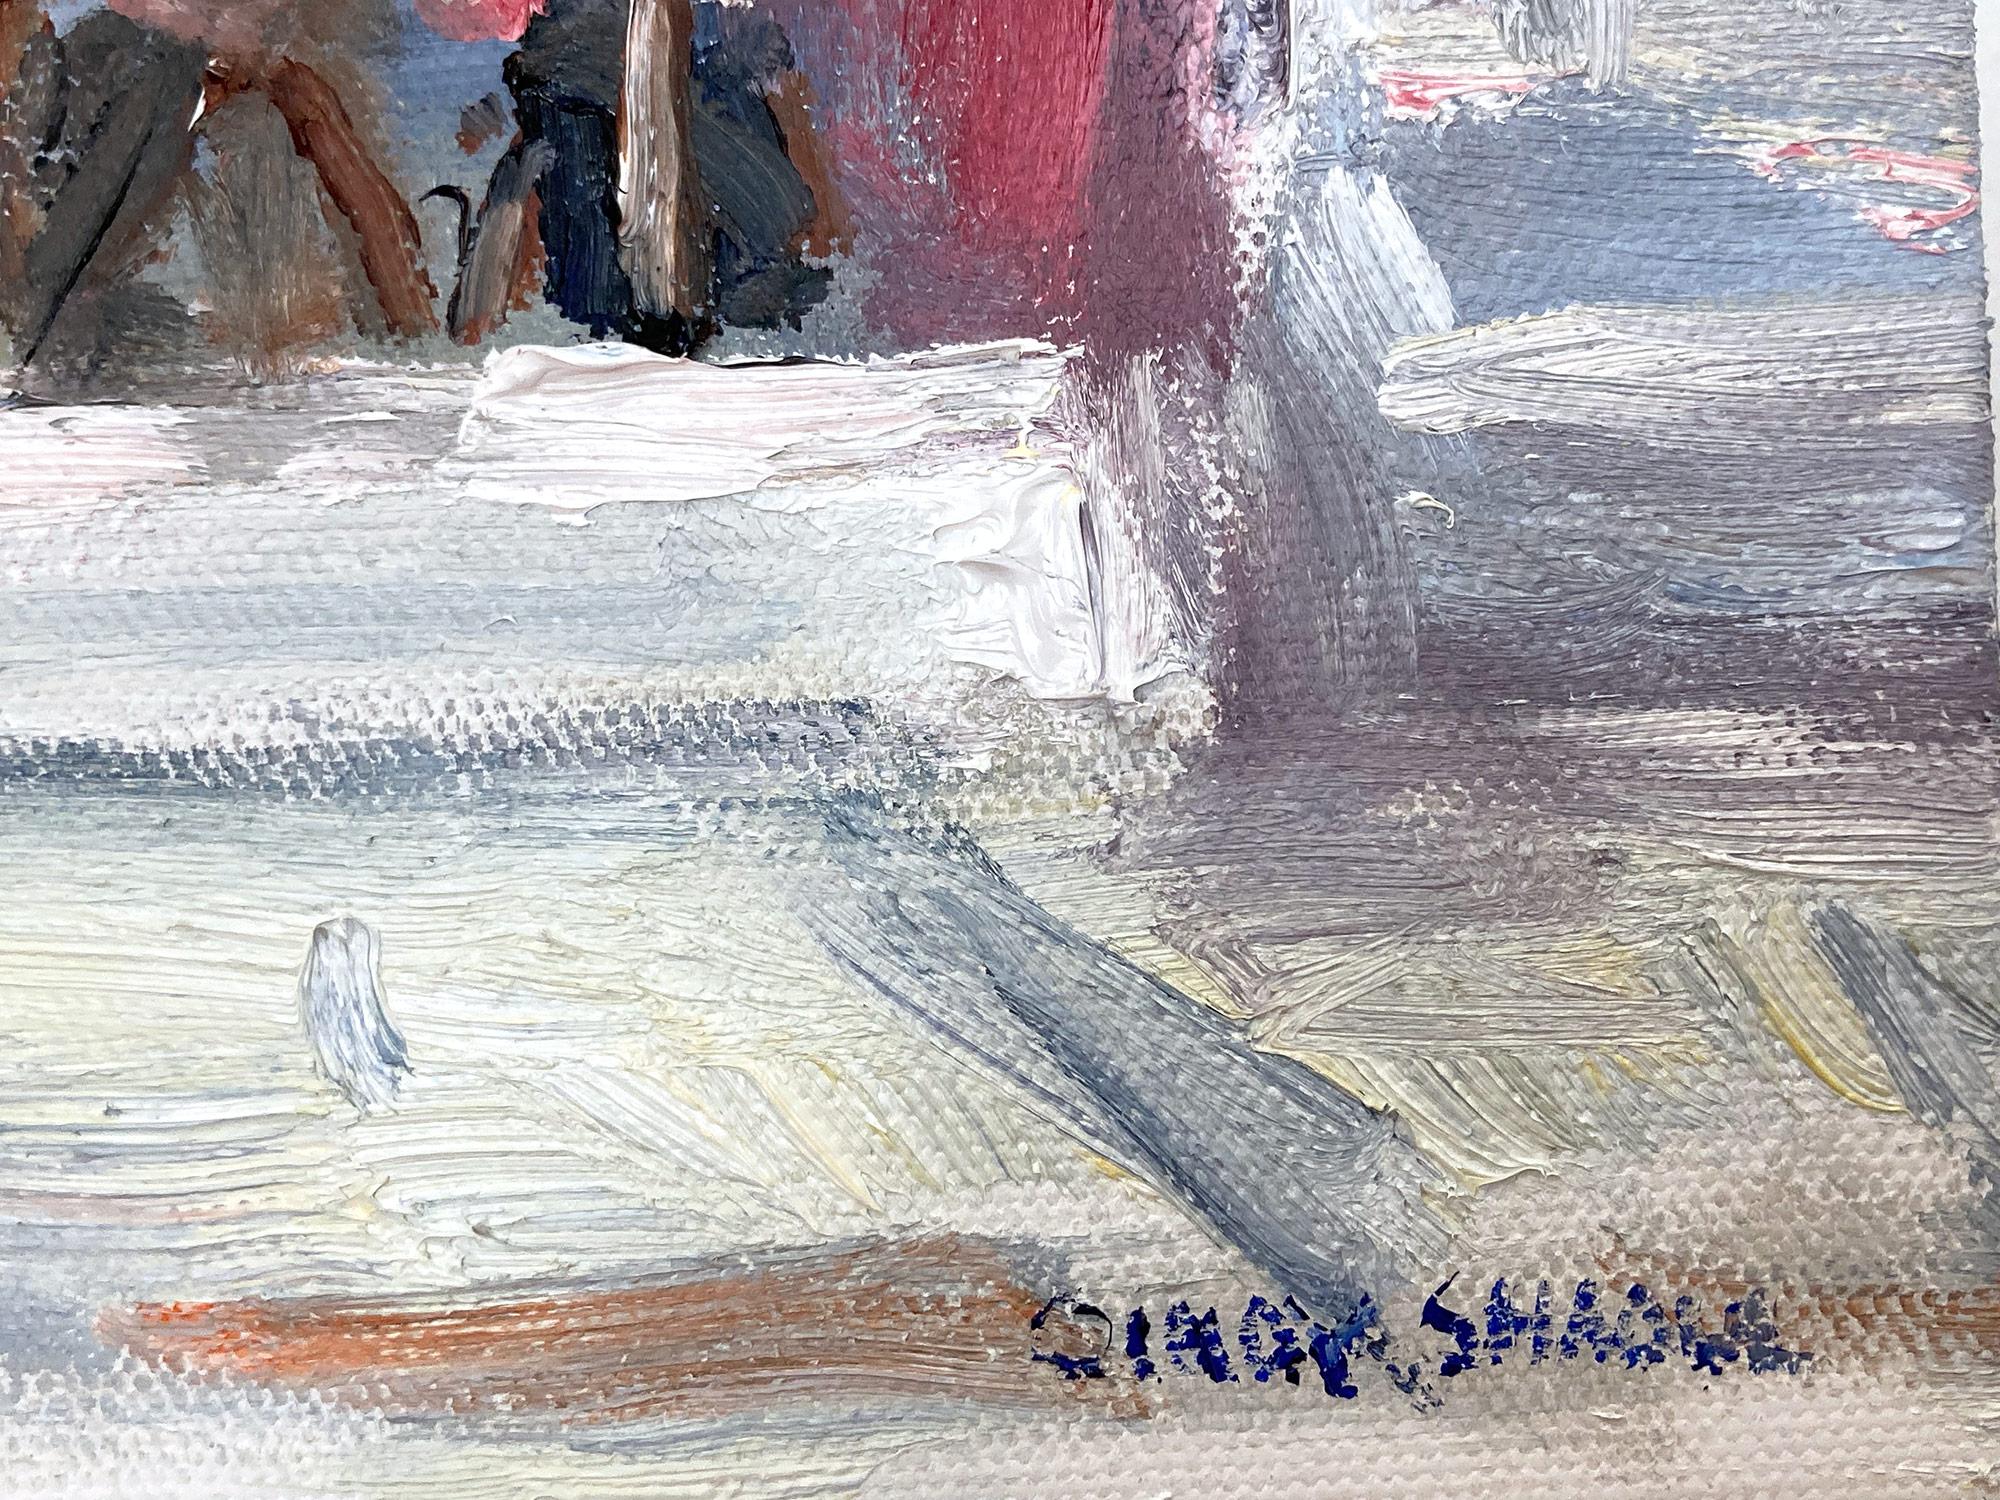 This painting depicts an impressionistic Plein Air scene of Brunch at Extra Virgin in the West Village NYC. The thick brush strokes and fun marks creates an atmosphere reminiscent of the impressionists from the 20th Century. We can feel the moment